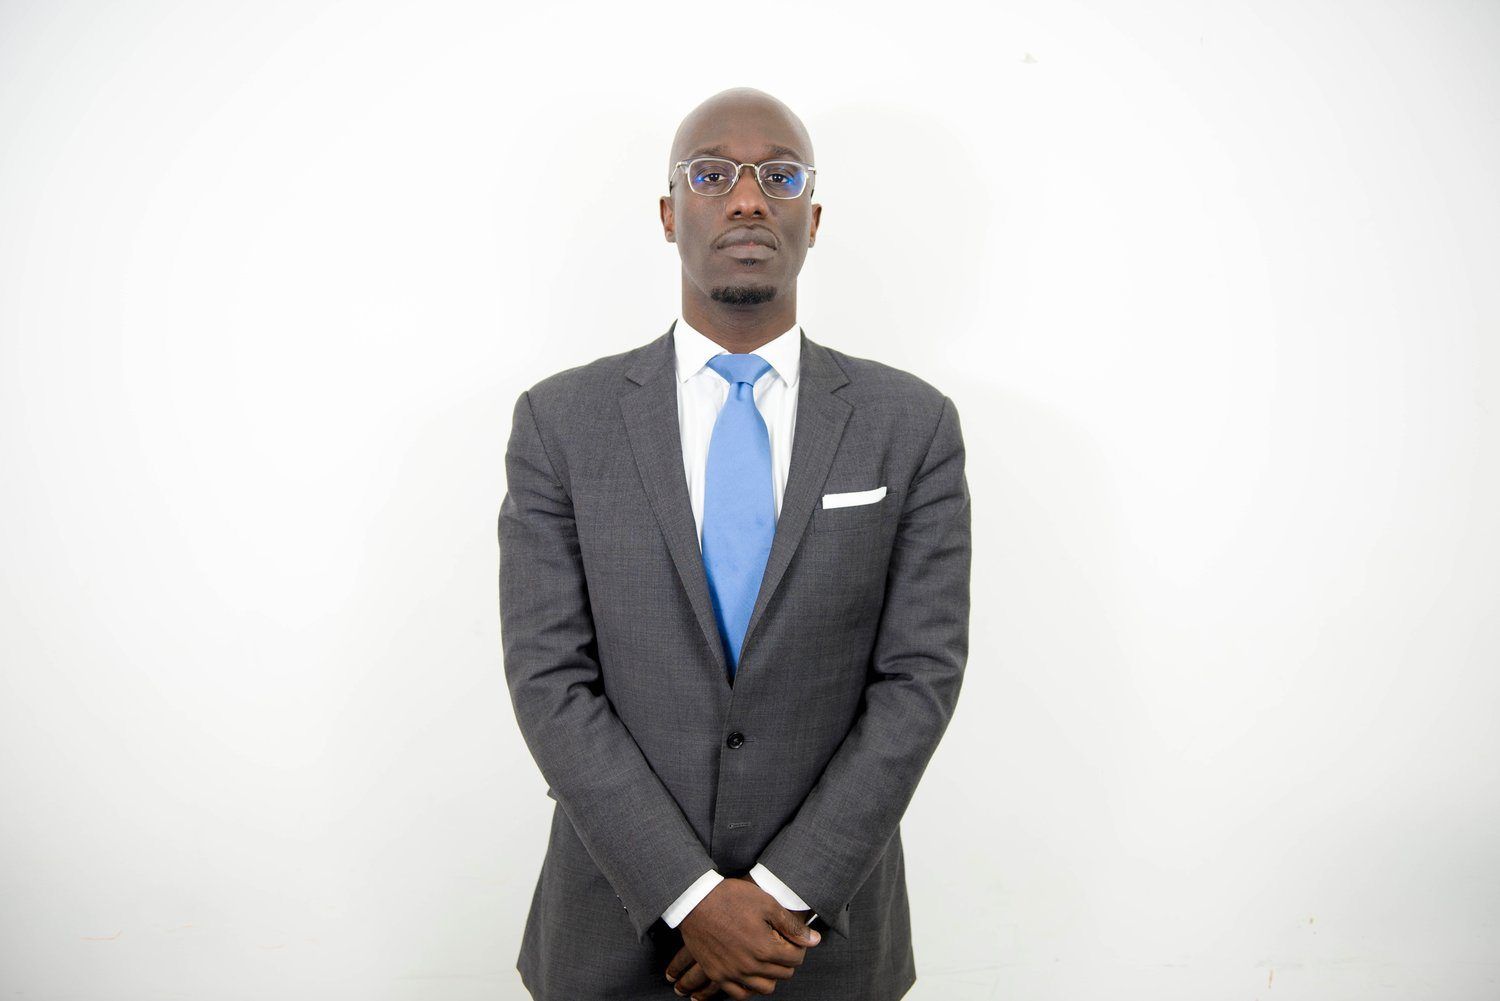 Meet Your Candidate: Mawuli Hormeku For East New York’s District 42